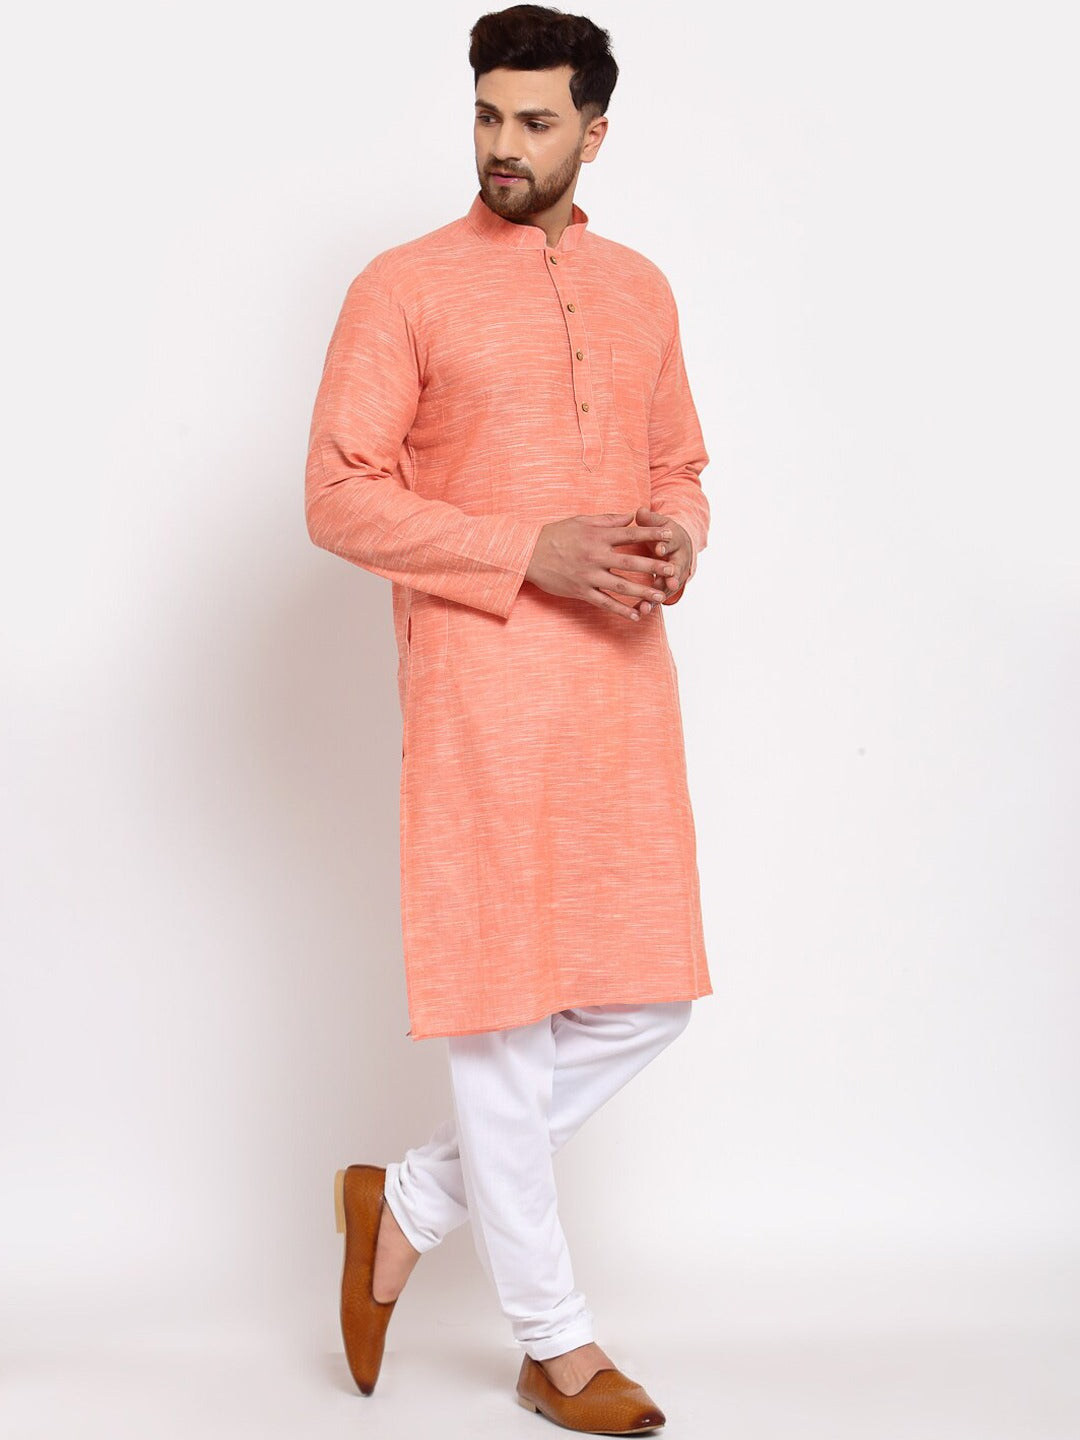 Orange Solid Cotton Kurta Indian Clothing in Denver, CO, Aurora, CO, Boulder, CO, Fort Collins, CO, Colorado Springs, CO, Parker, CO, Highlands Ranch, CO, Cherry Creek, CO, Centennial, CO, and Longmont, CO. NATIONWIDE SHIPPING USA- India Fashion X